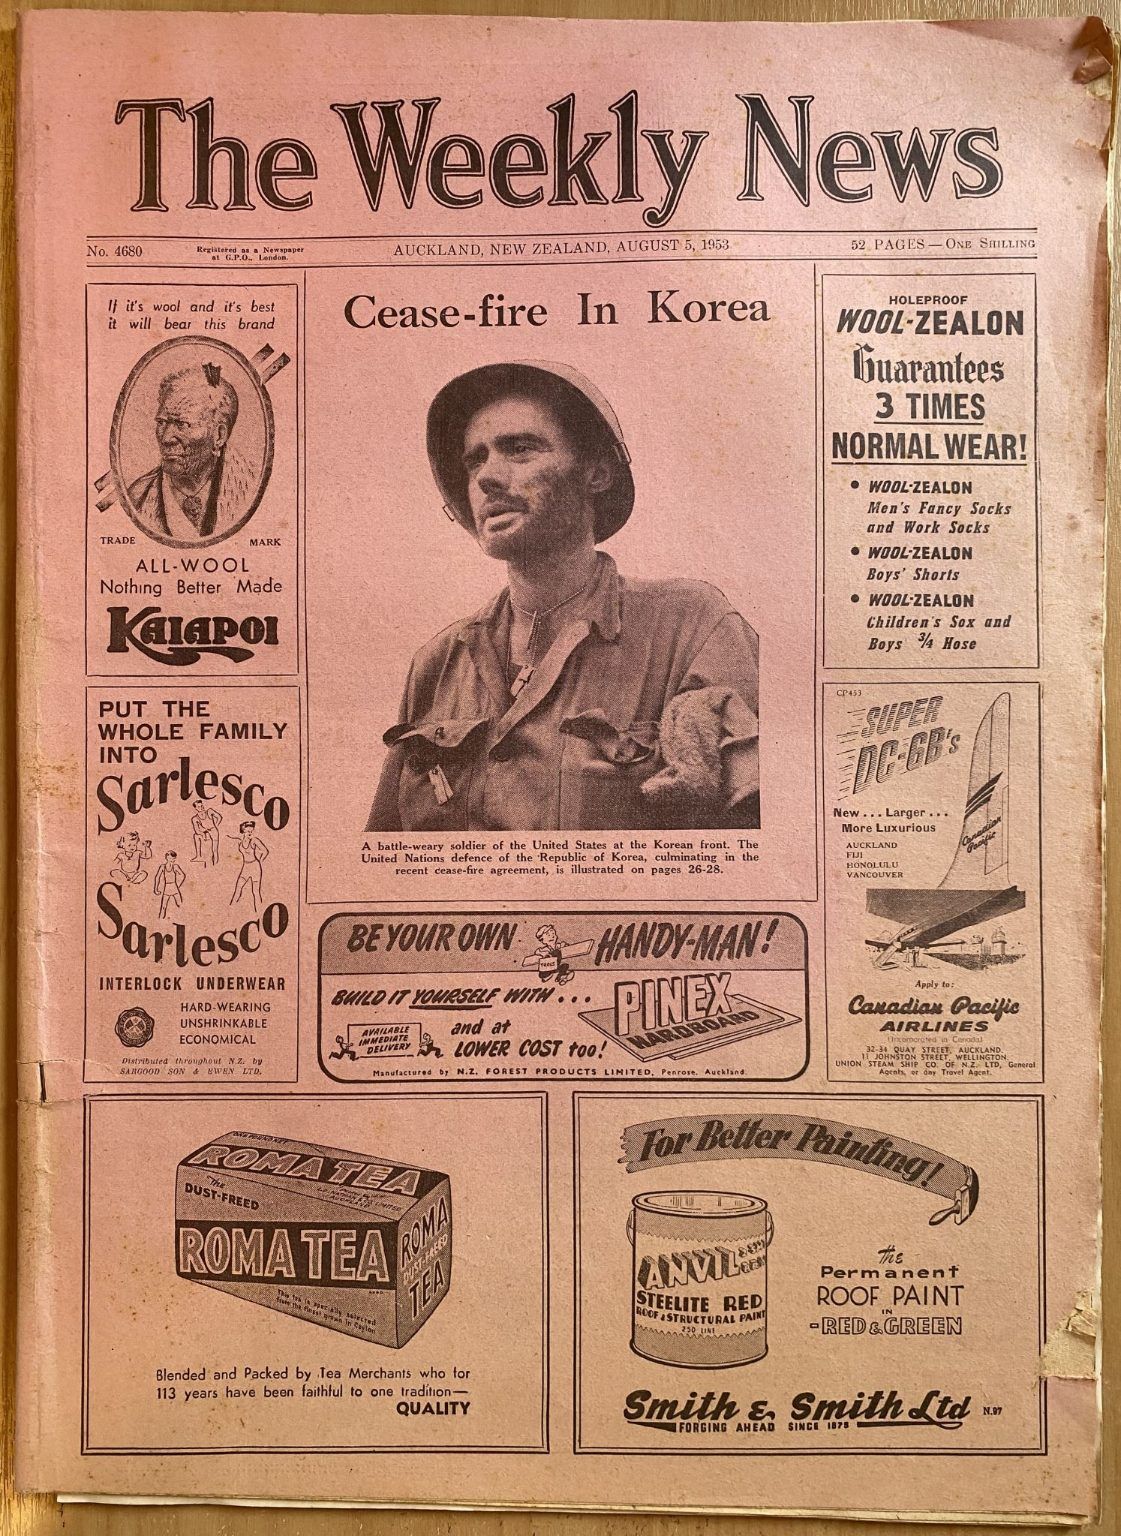 OLD NEWSPAPER: The Weekly News - No. 4680, 5 August 1953